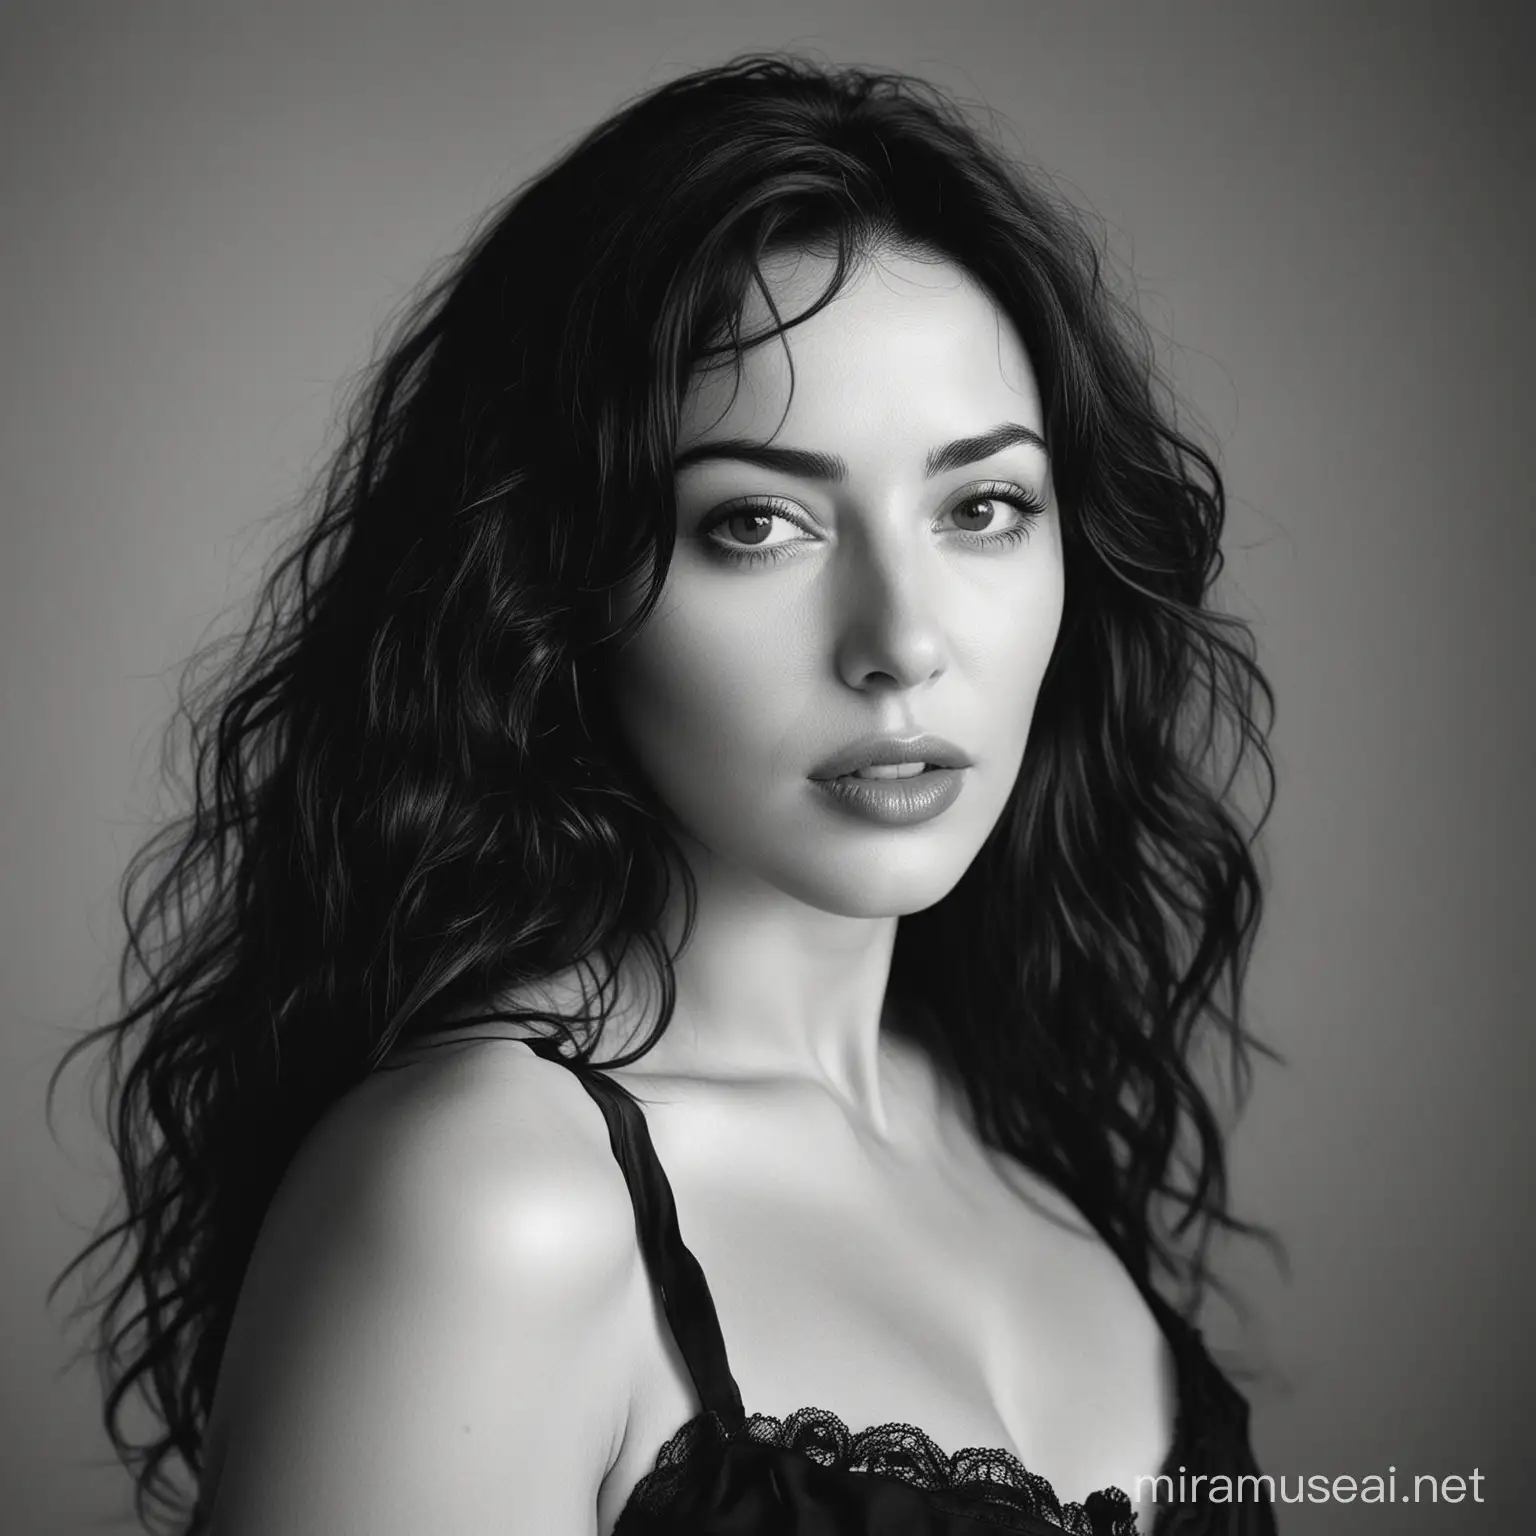 film photography, light fabric, using a 35mm lens, f/2, film, grain, beautiful young monica bellucci, portrait, malena, realistic natural skin, realistic  natural hair, beautiful eyes, red lips, deep eyes, black dress, black and white grain fuji film